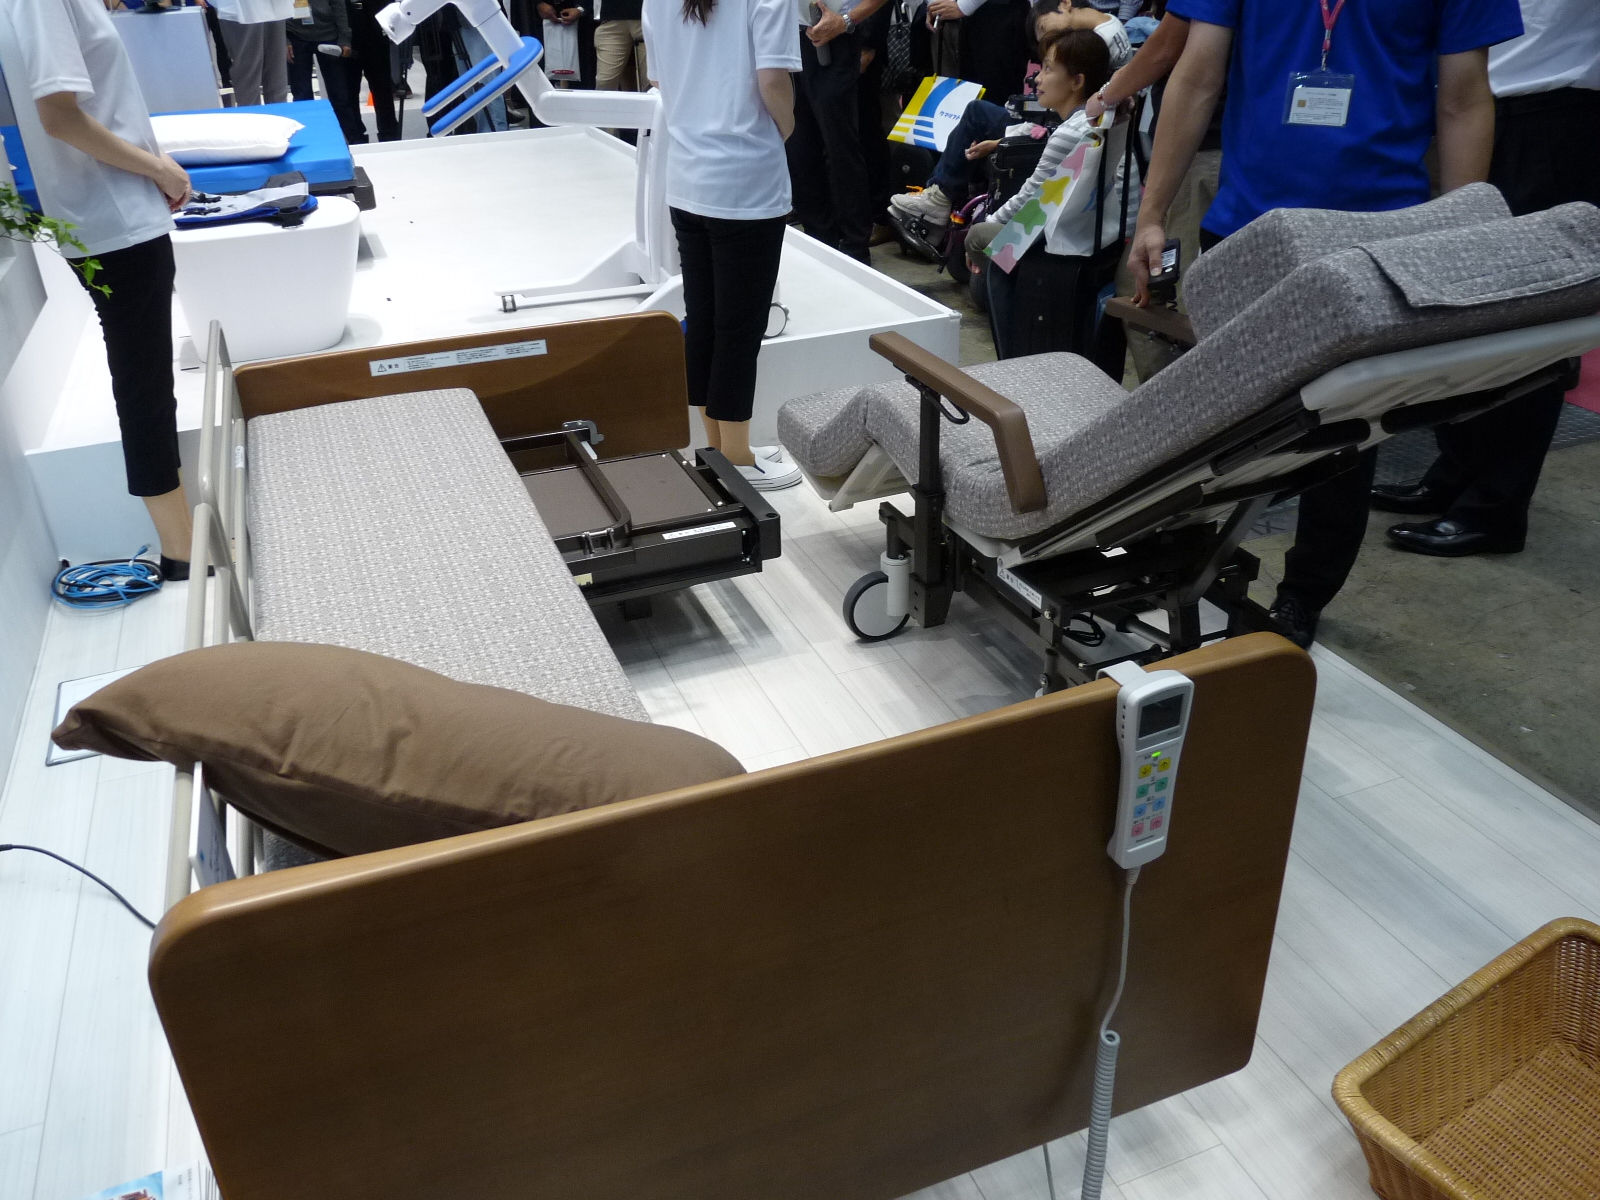 A portion of the electric care bed, "Resyone," transforms into an electric wheelchair.